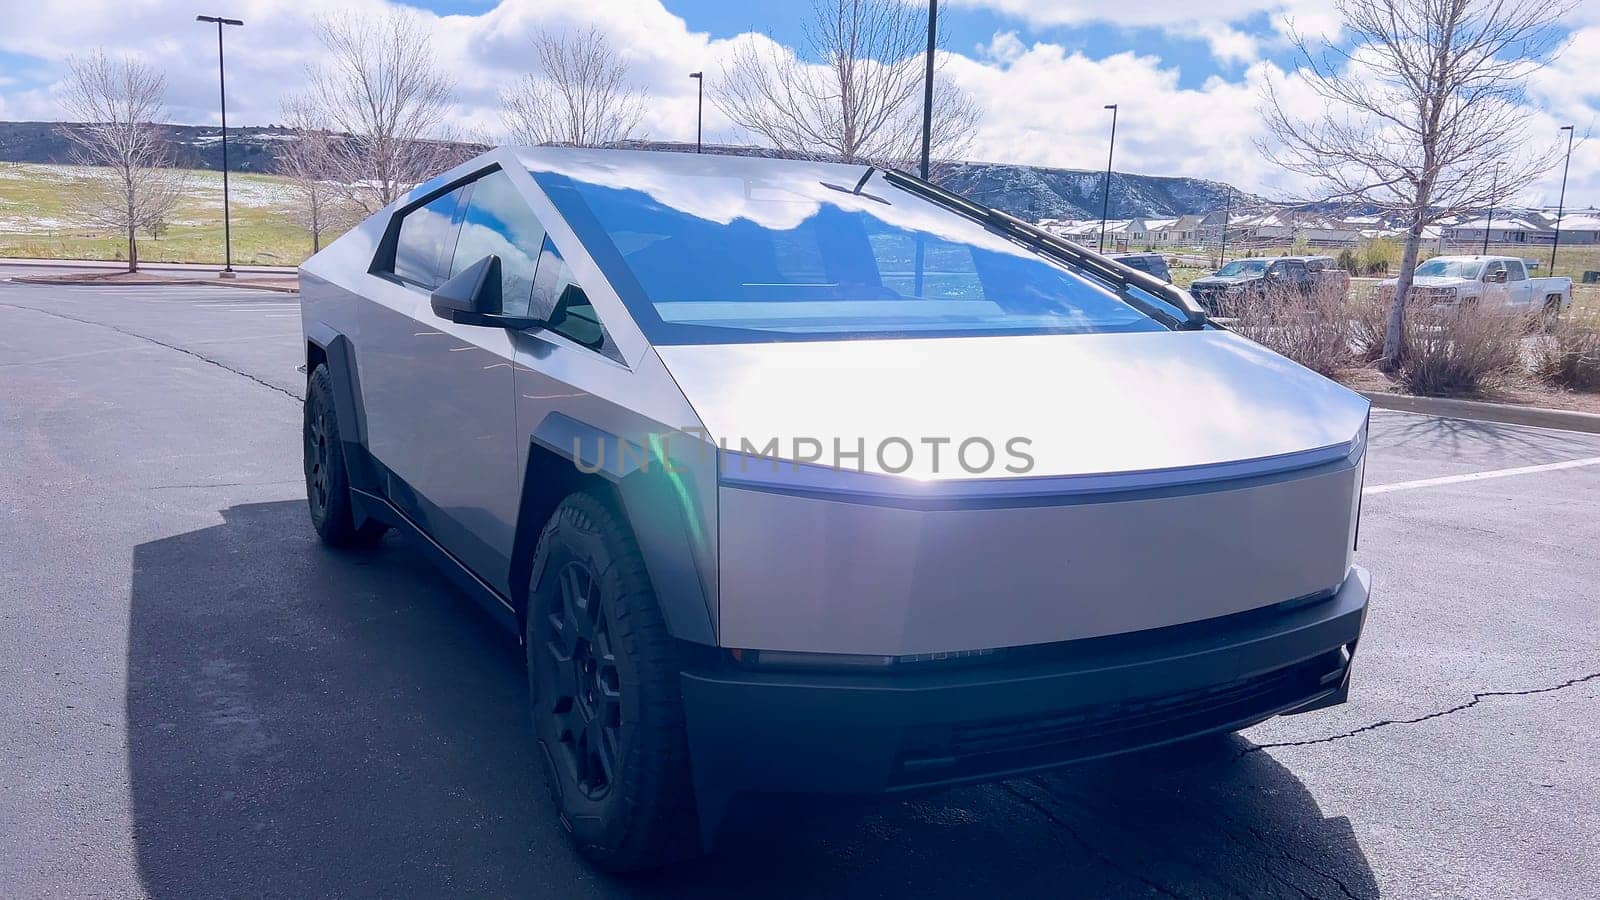 Front View of a Tesla Cybertruck in an Outdoor Parking Lot by arinahabich